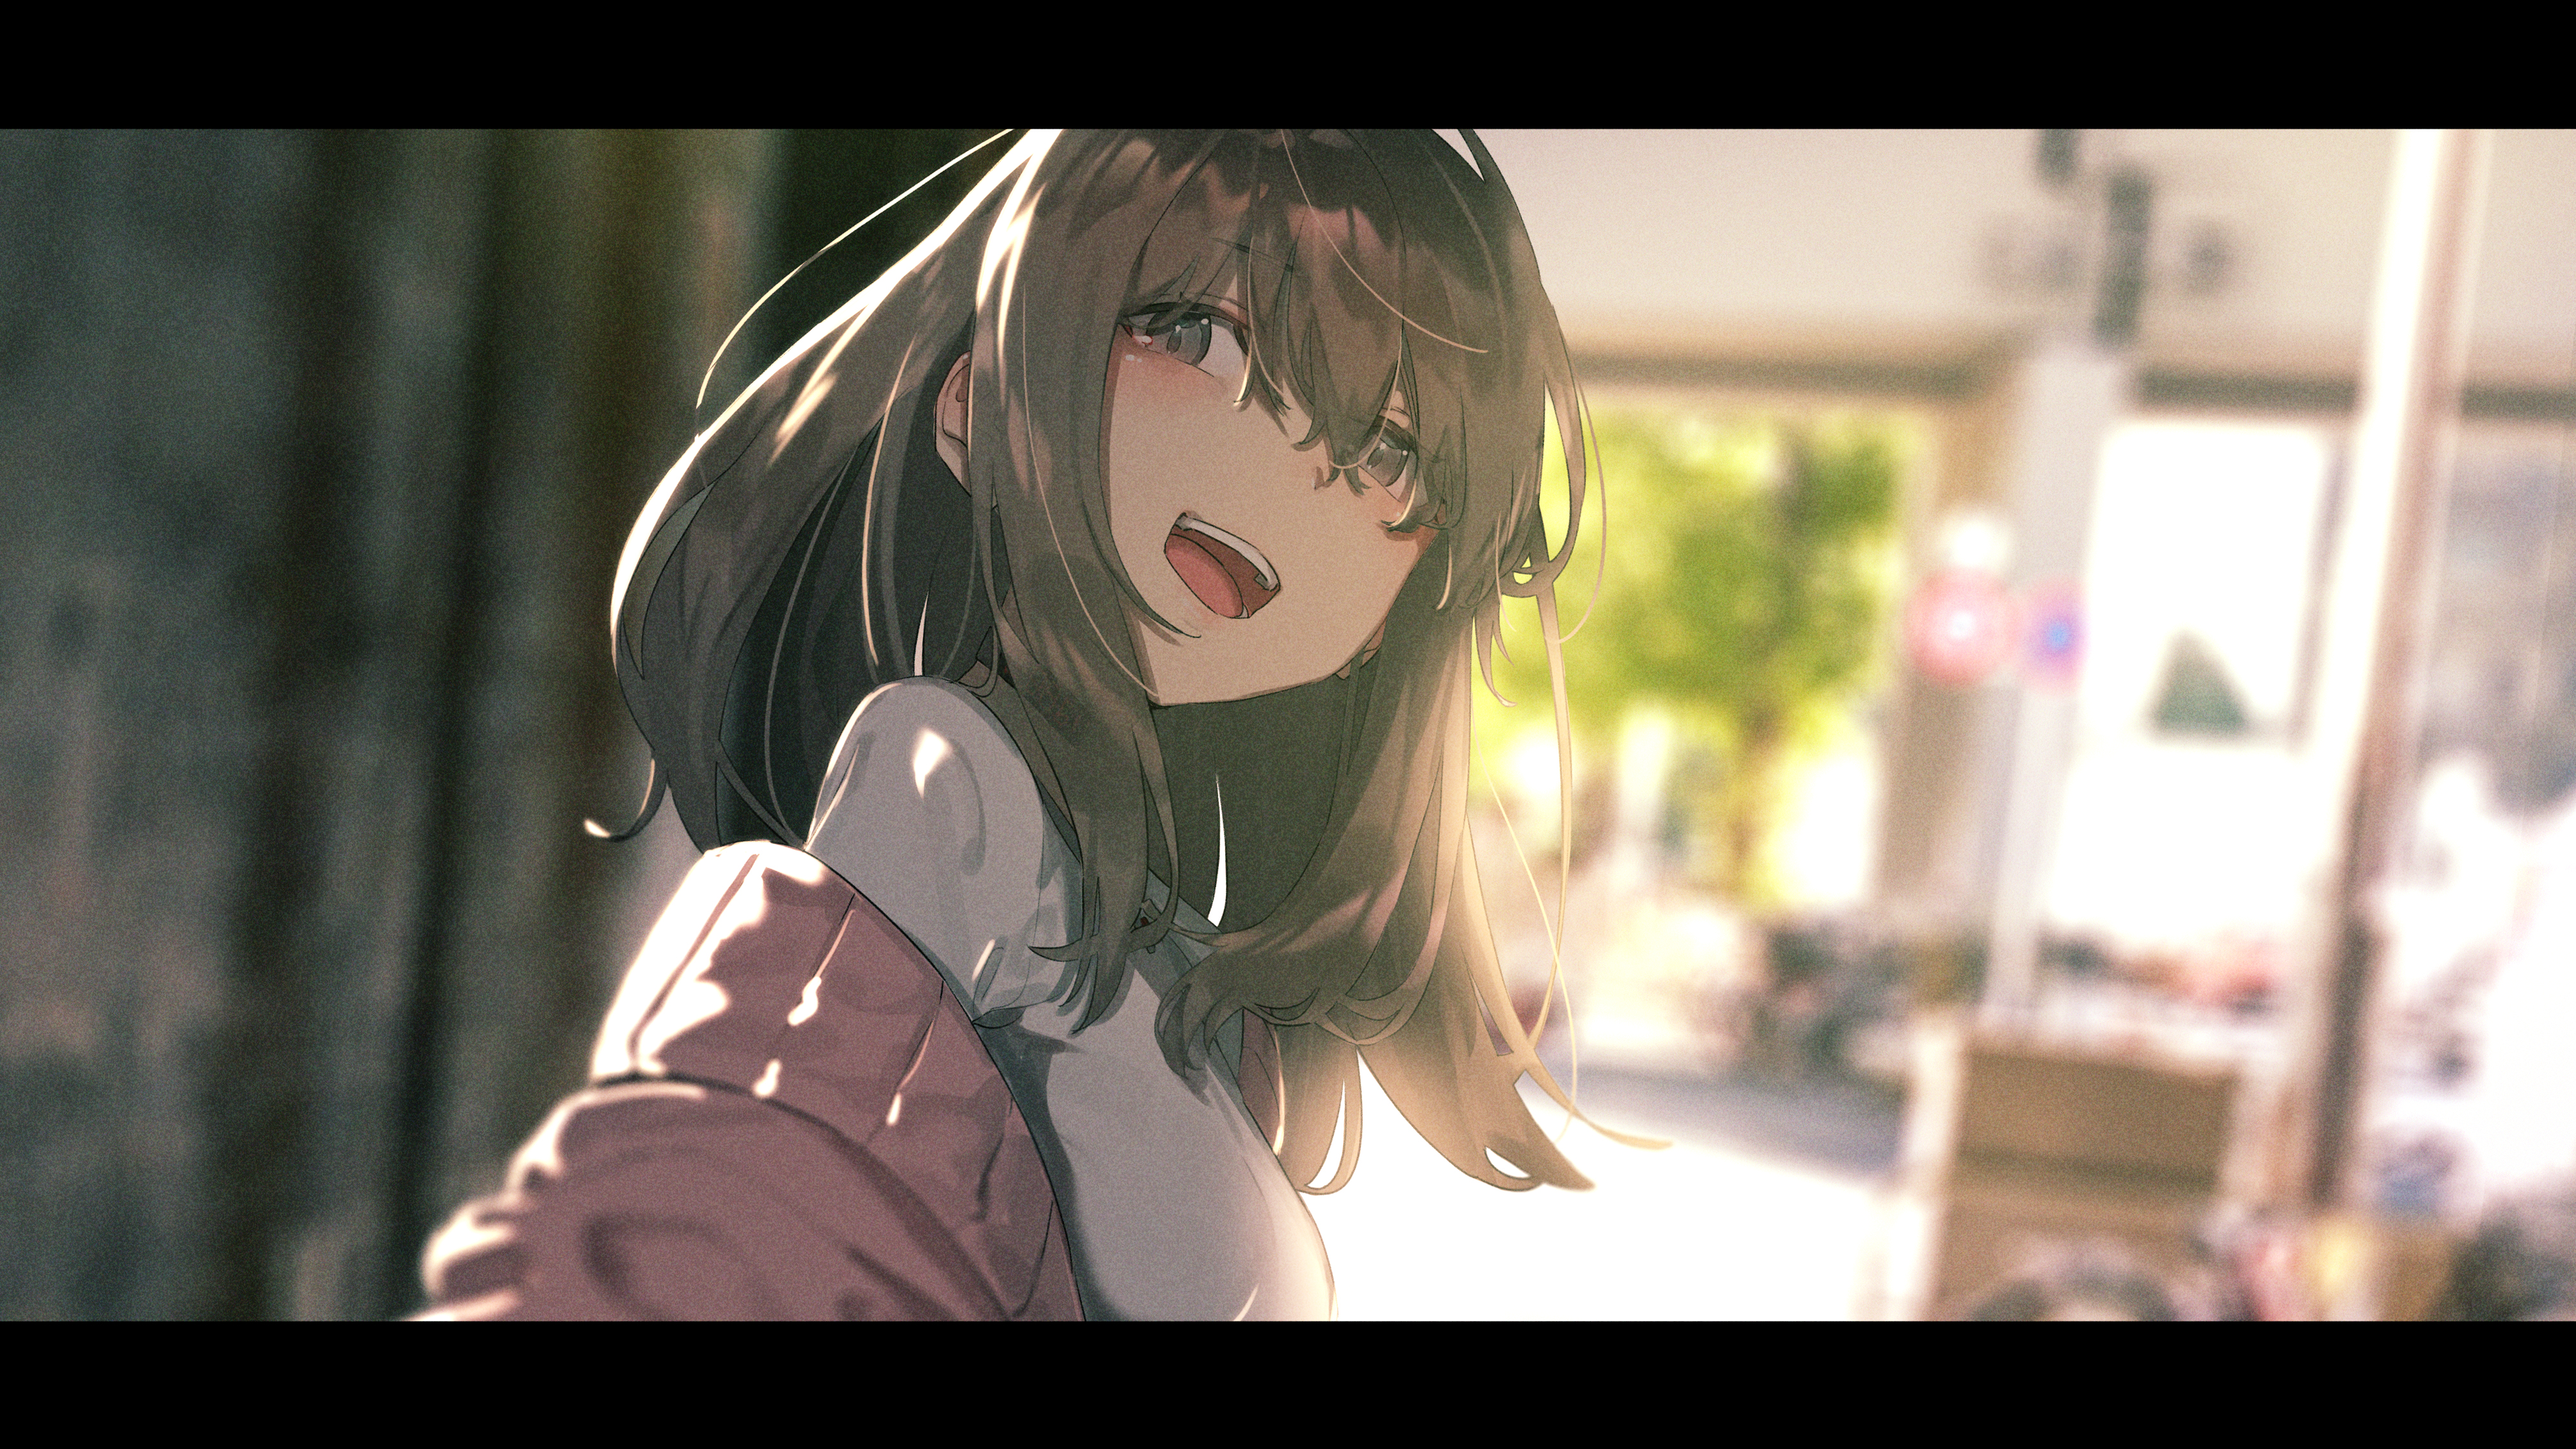 Anime 4026x2264 looking at viewer open mouth smiling happy bokeh portrait anime girls original characters artwork digital art illustration drawing 2D anime Rolua Noa